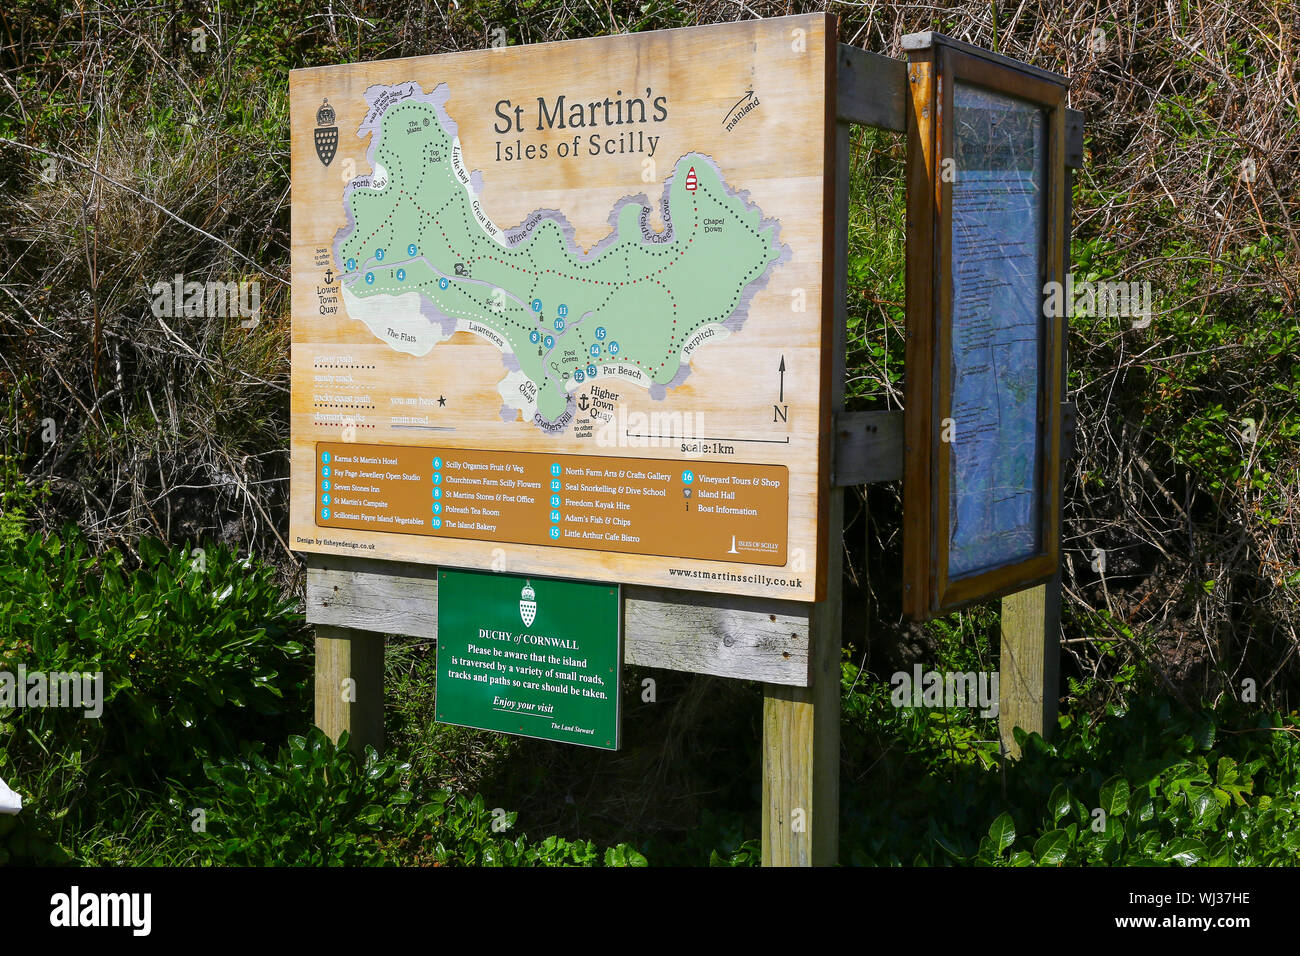 A location map on an information board on St Martin's island in the Isles of Scilly, Cornwall, England, UK Stock Photo